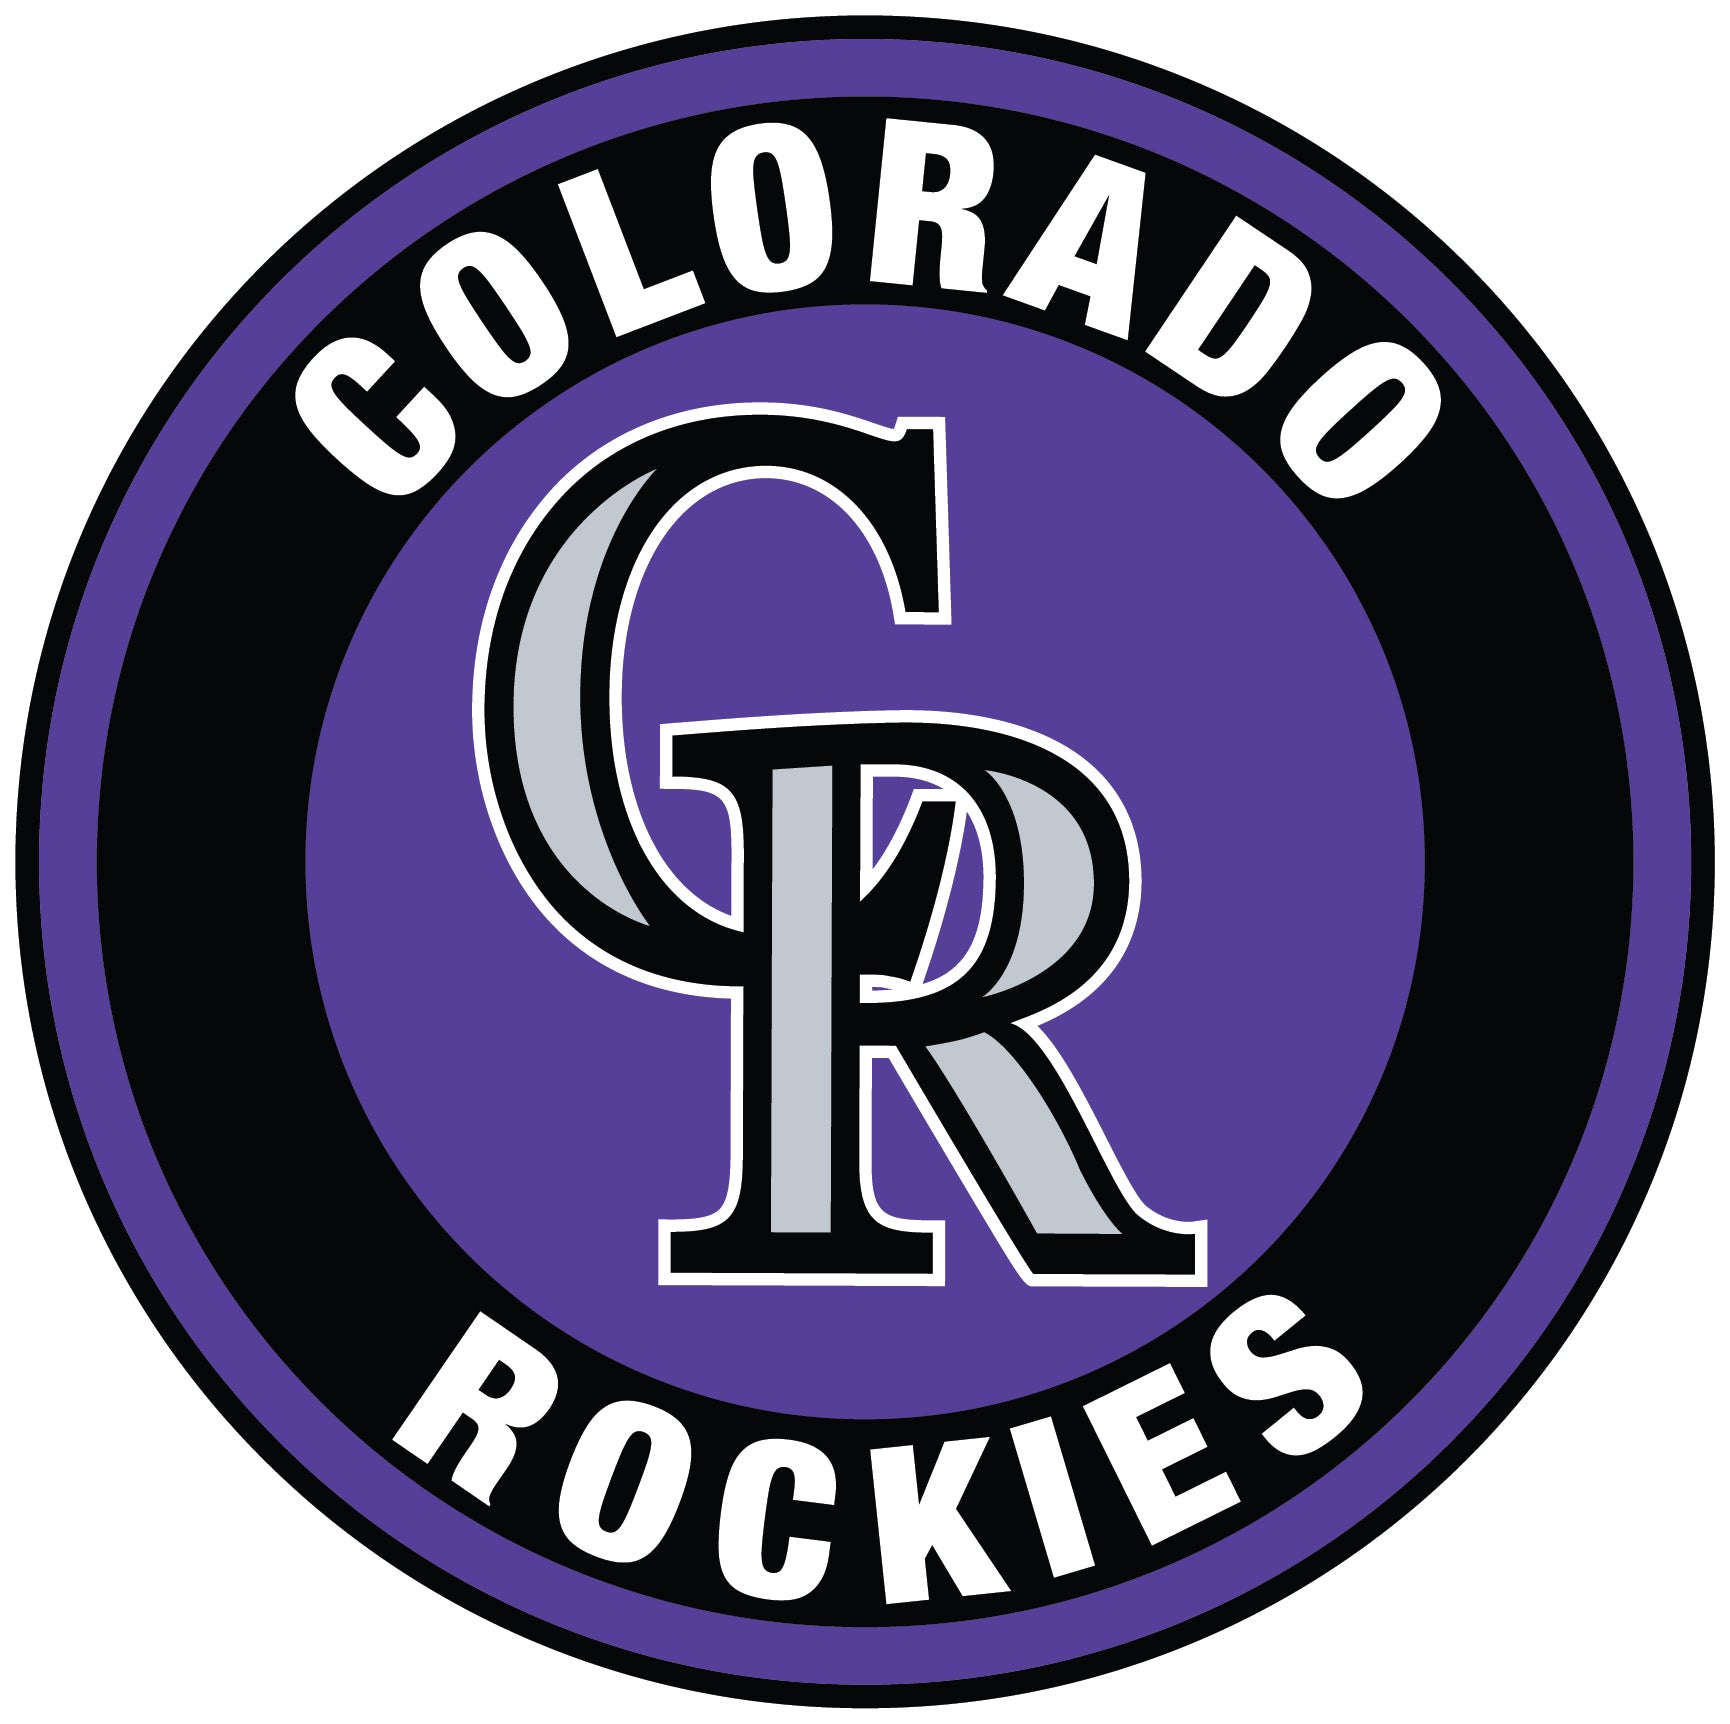 Registration for the Rockies Youth - Colorado Rockies